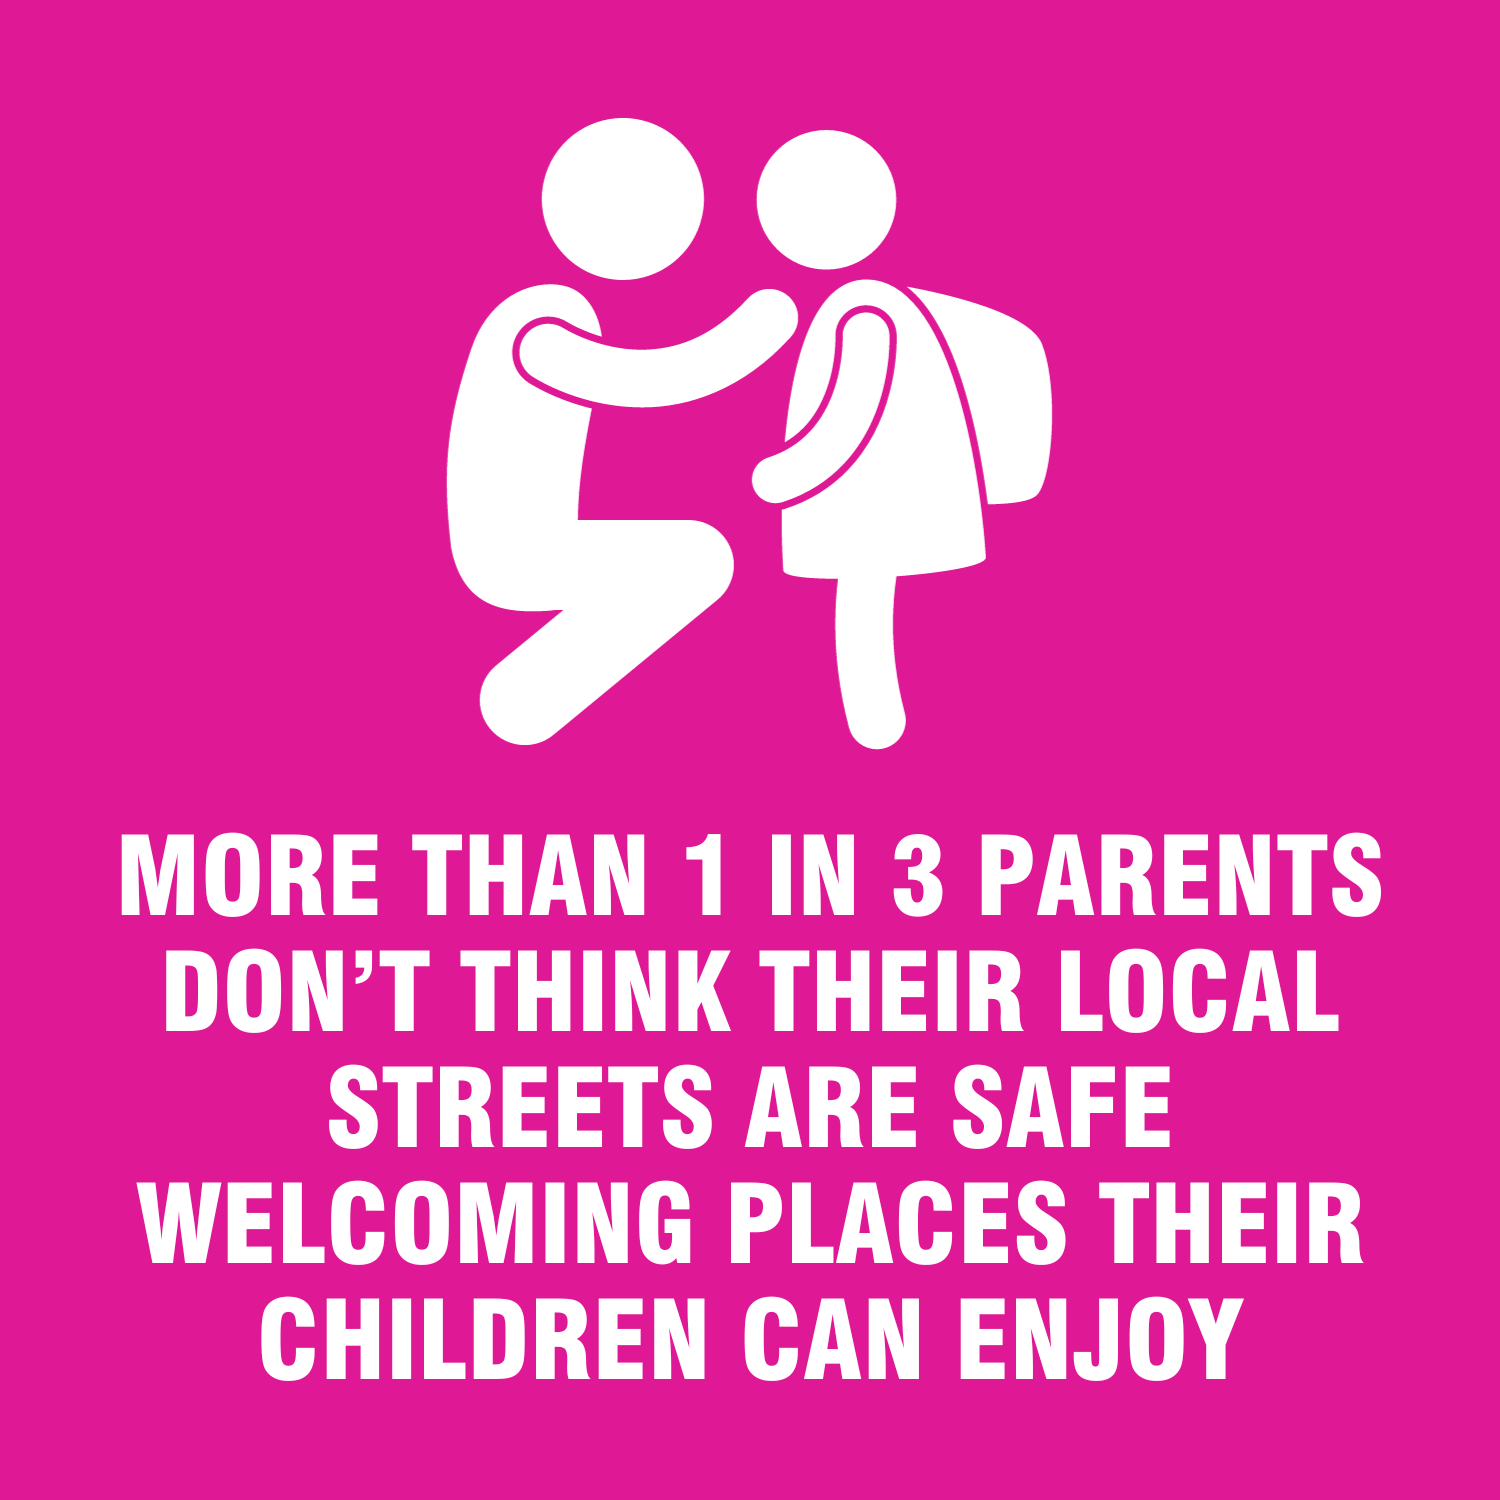 more than 1 in 3 parents don't think their local streets are safe welcoming places their children can enjoy